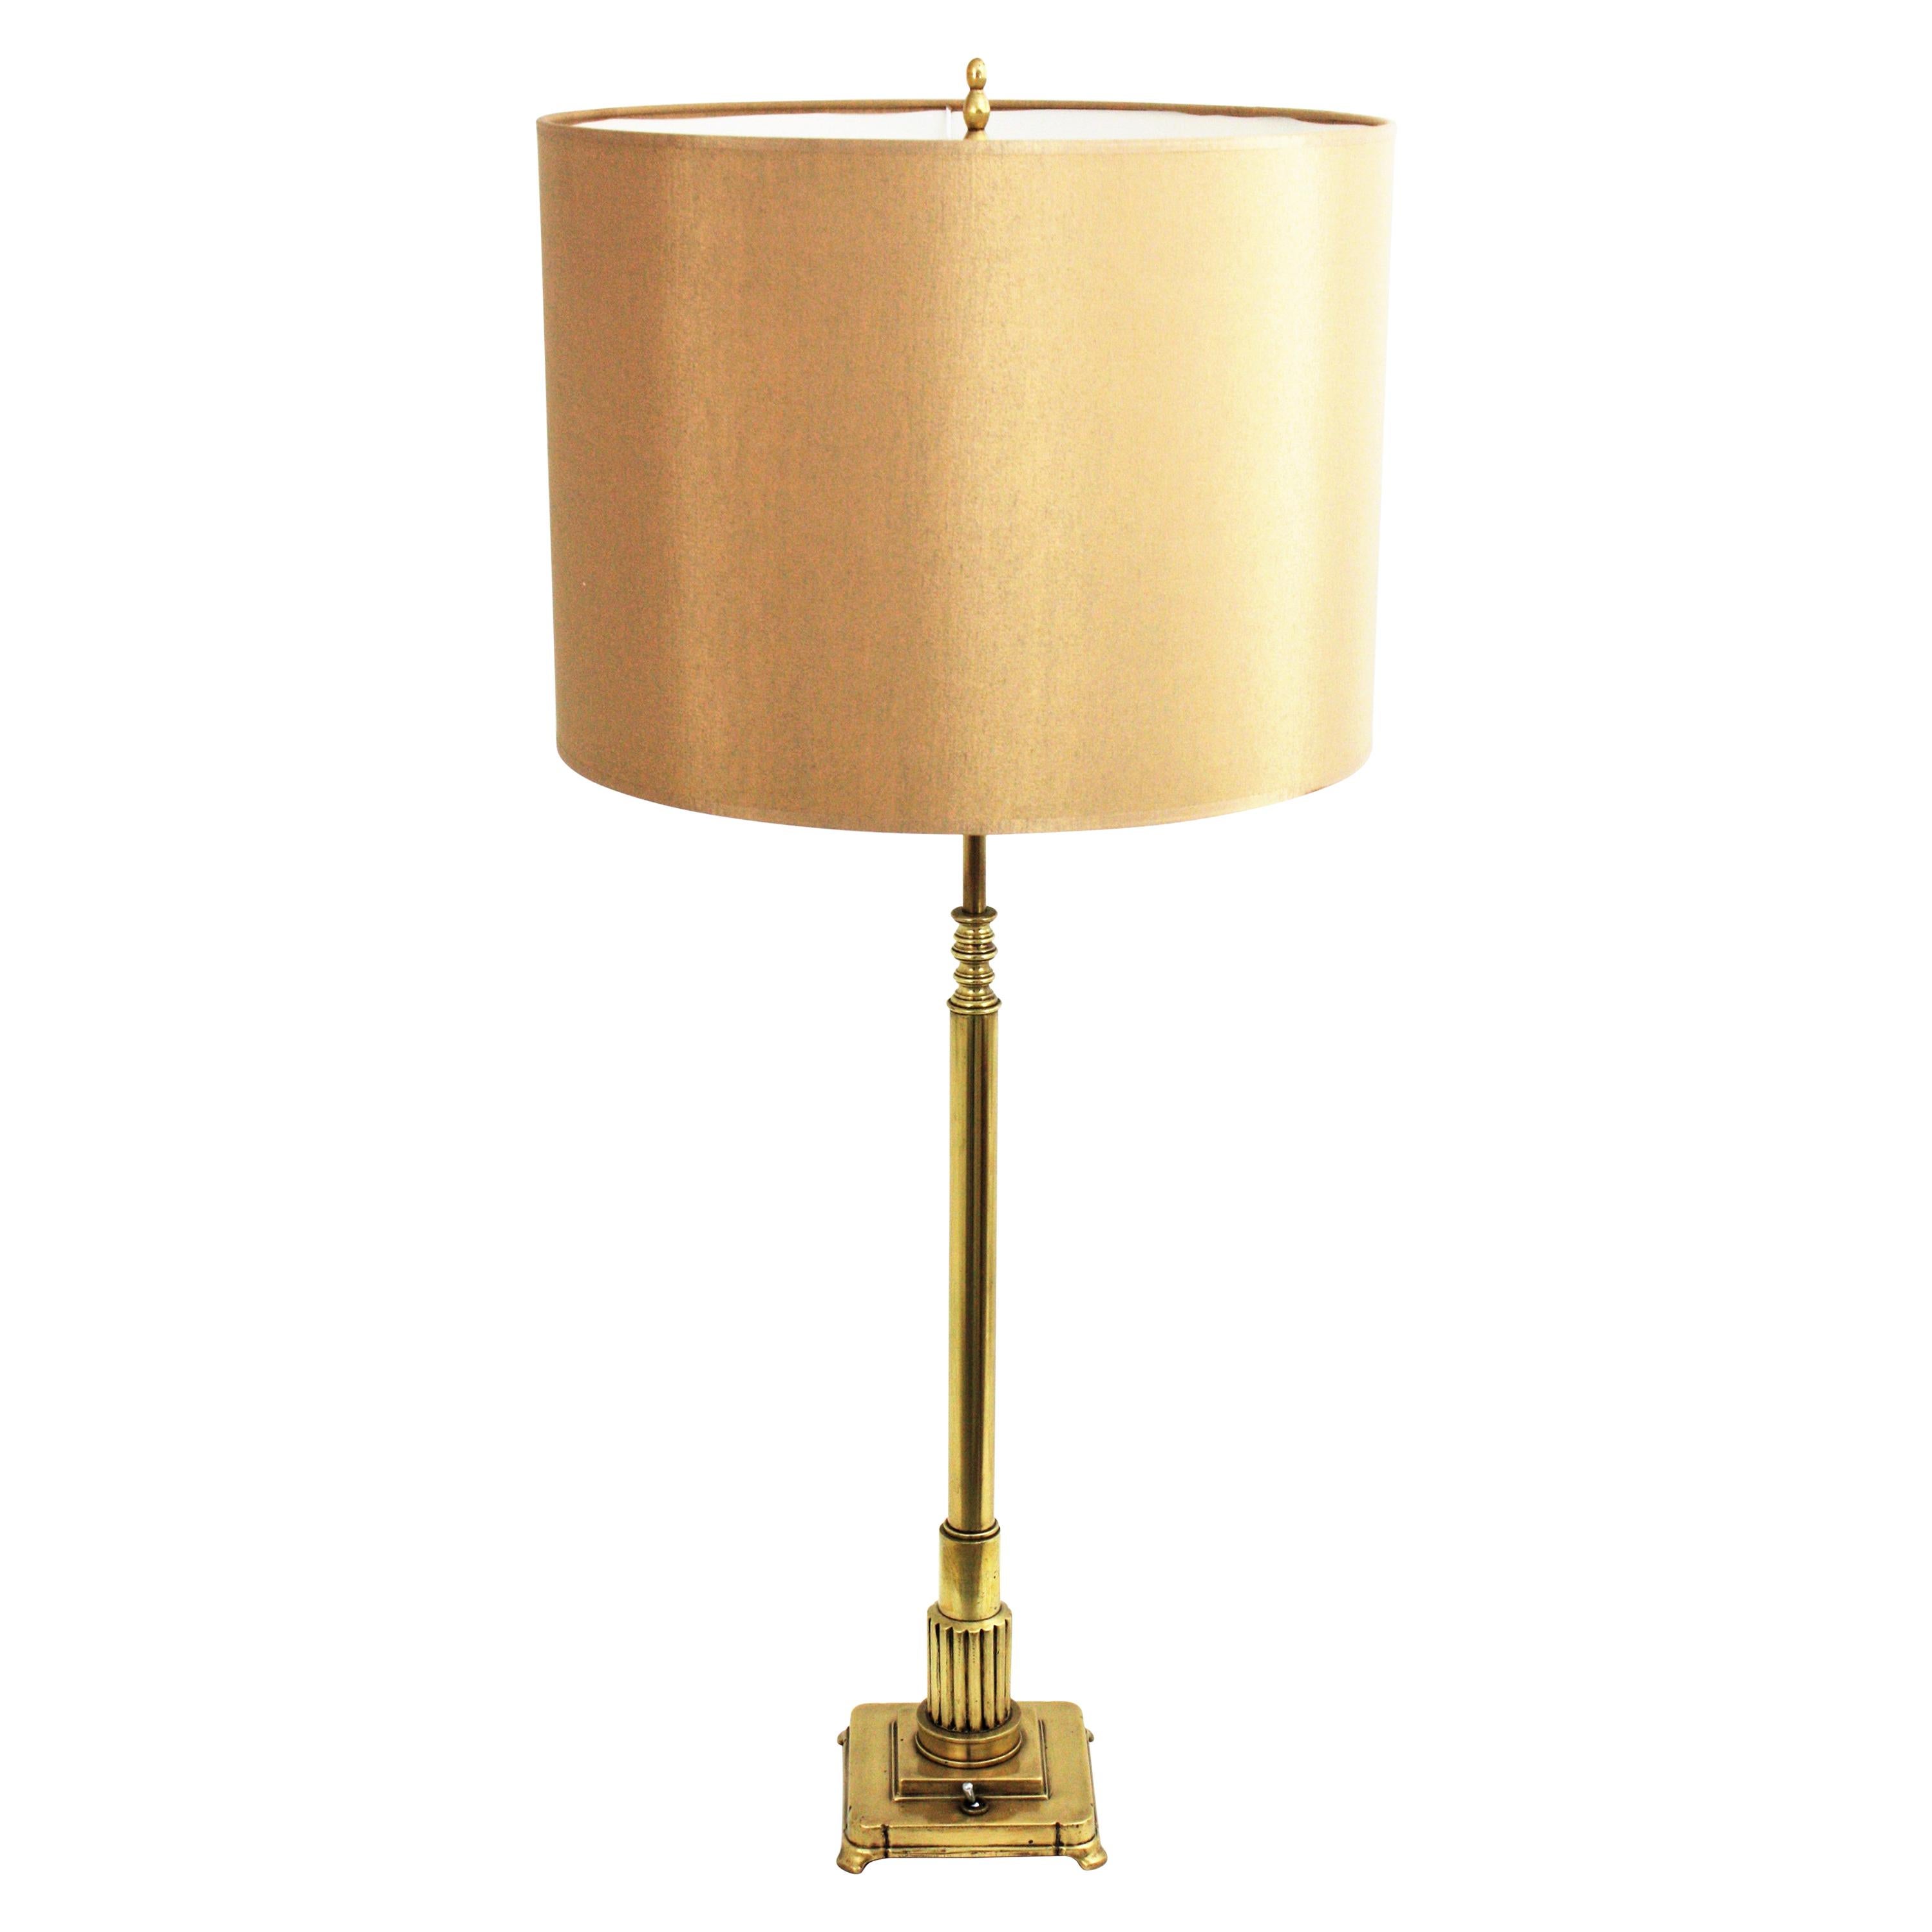 French Art Deco Column Table Lamp in Polished Brass